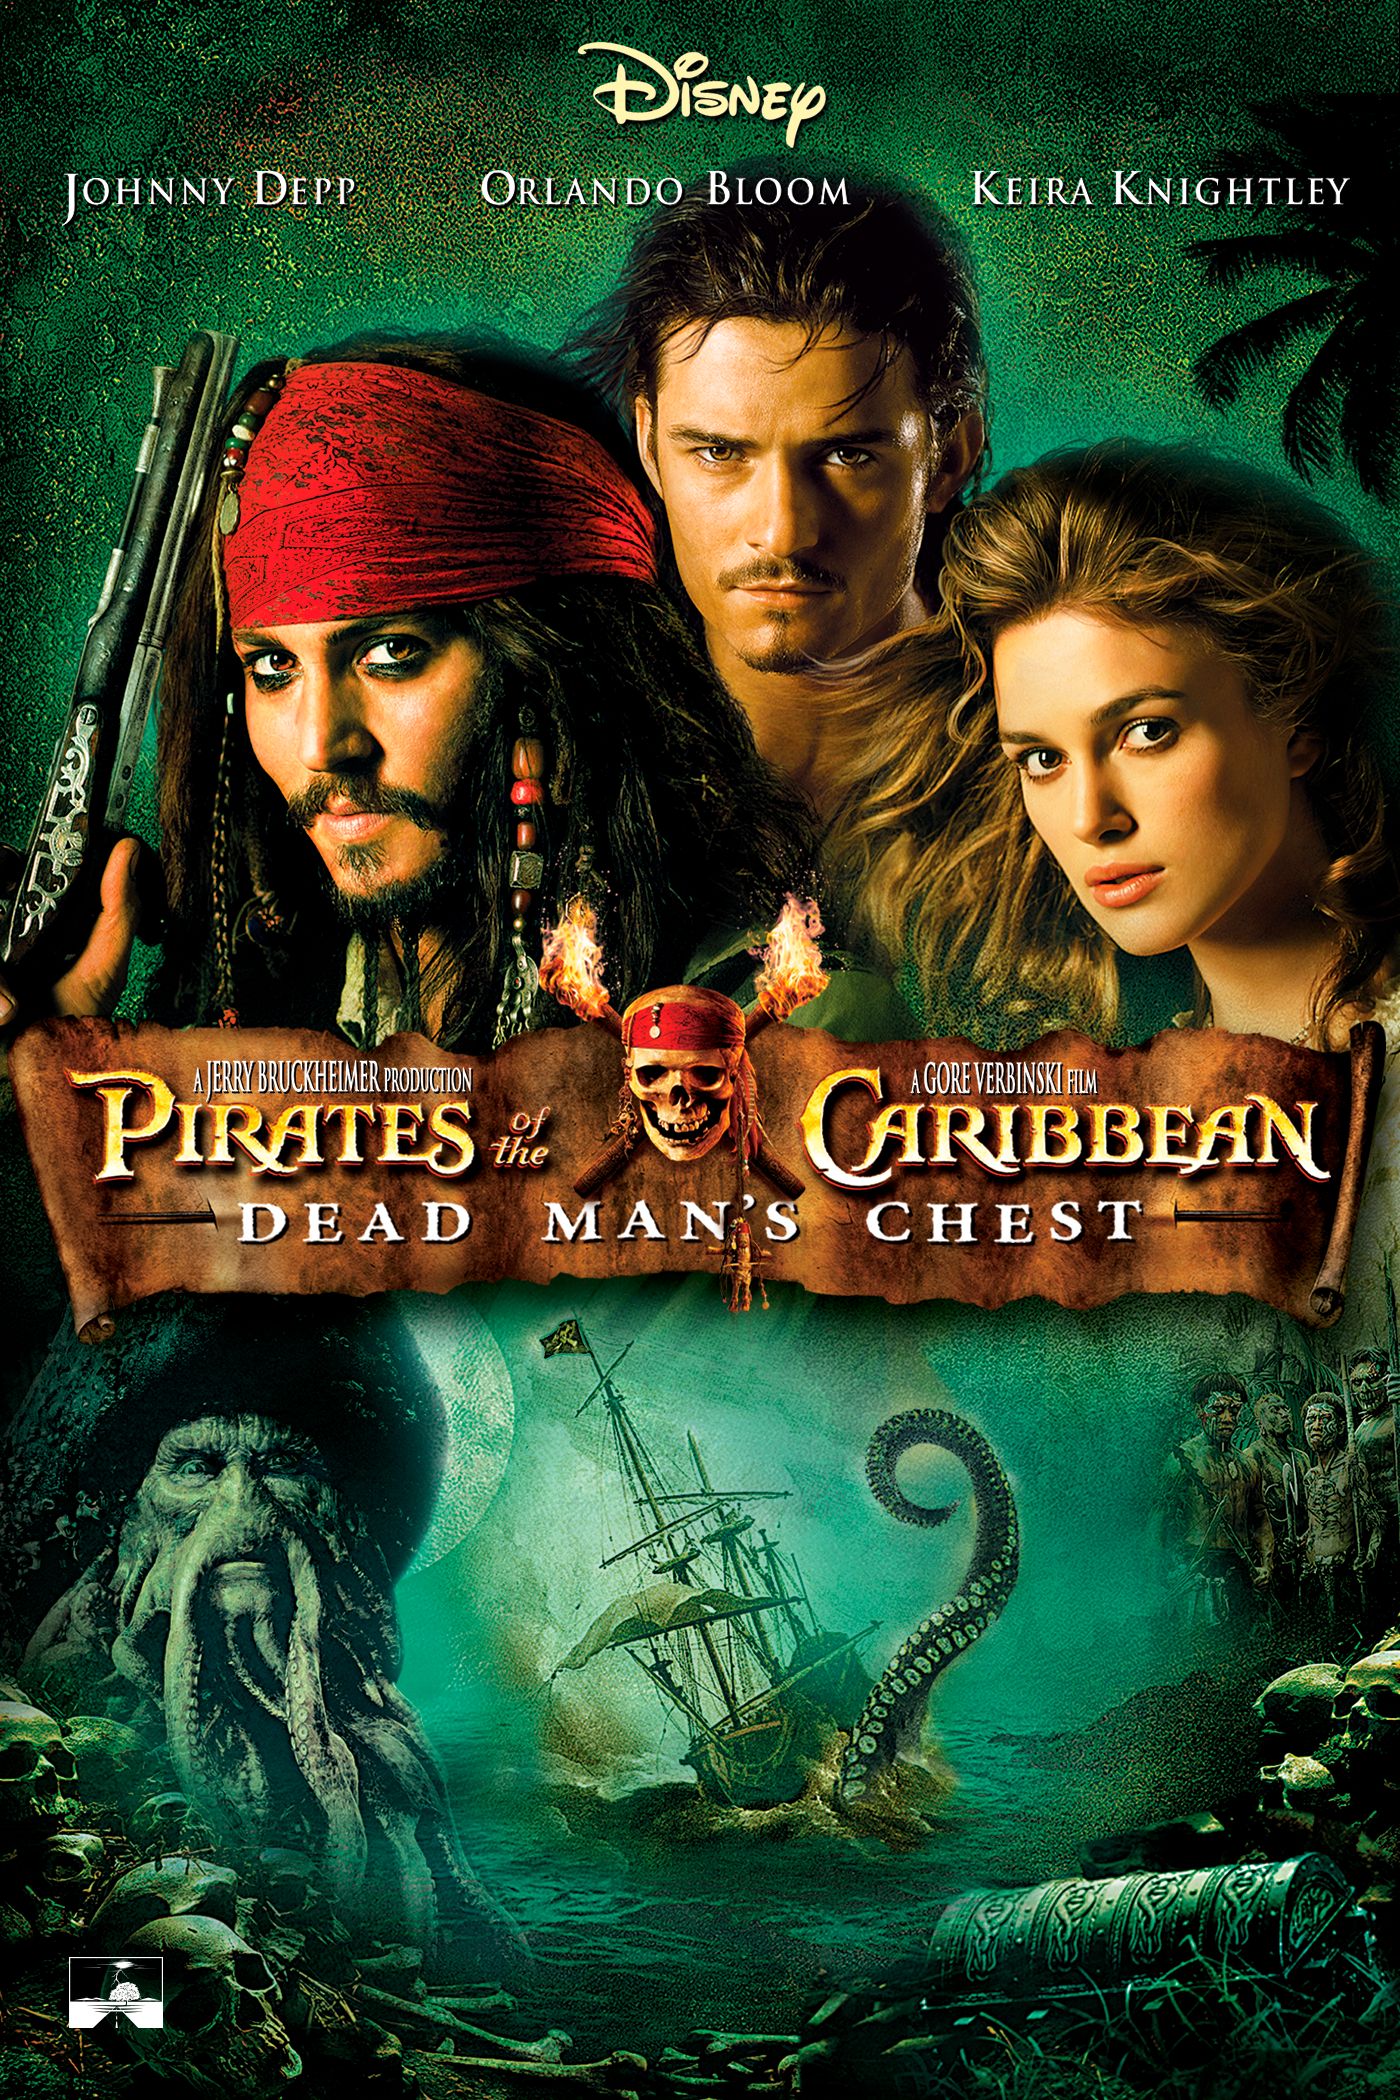 anthony alano recommends Watch Pirates 2 Online